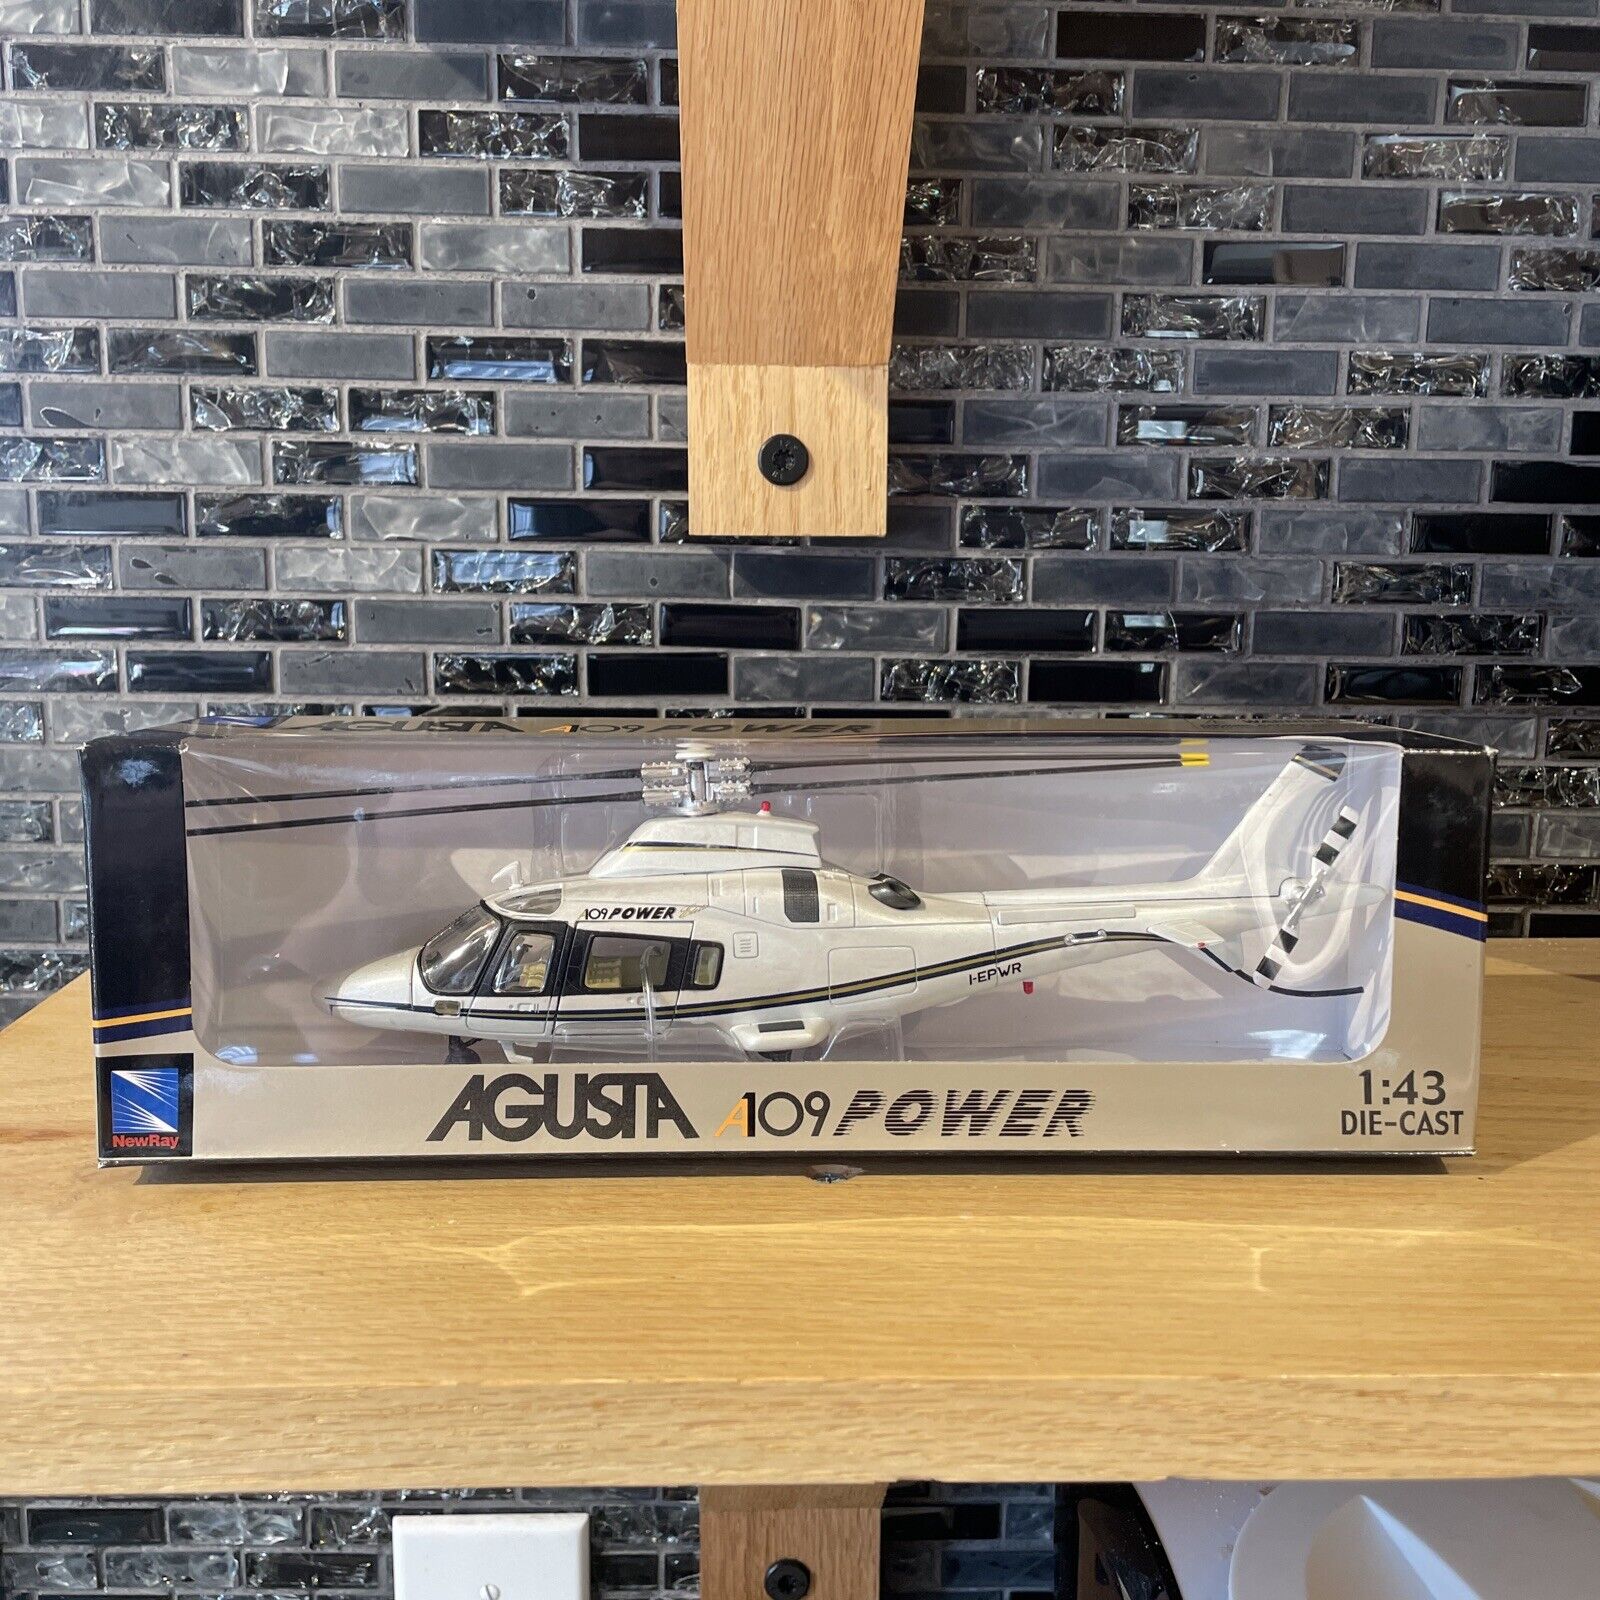 Agusta A109 Power Diecast Helicopter 1:43 Scale Model New-Ray Toys White New